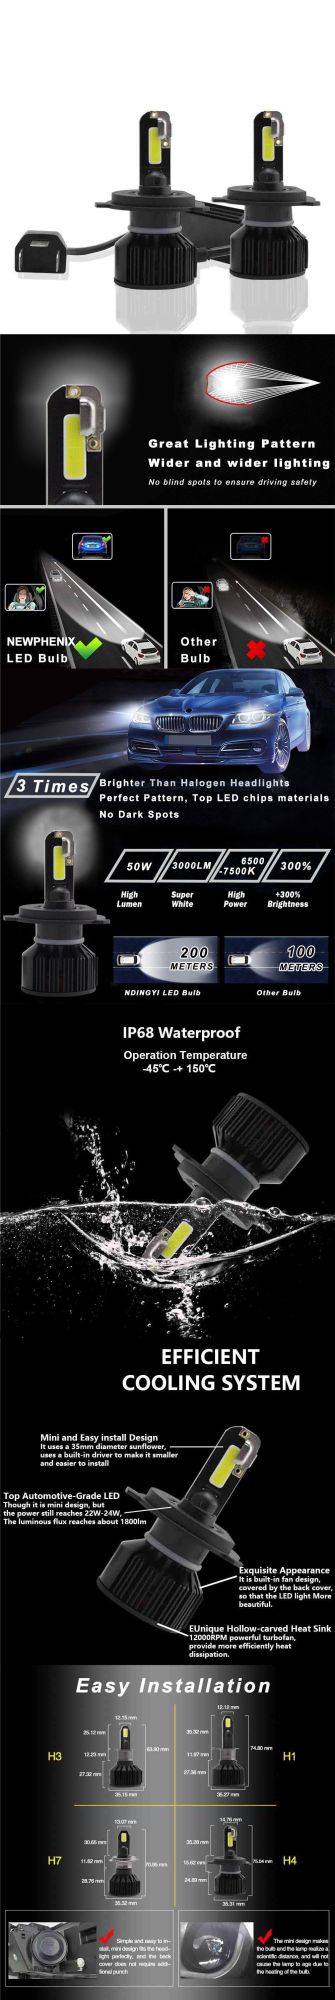 New Released E8 Economic 24W 4800lm LED Headlight for Cars